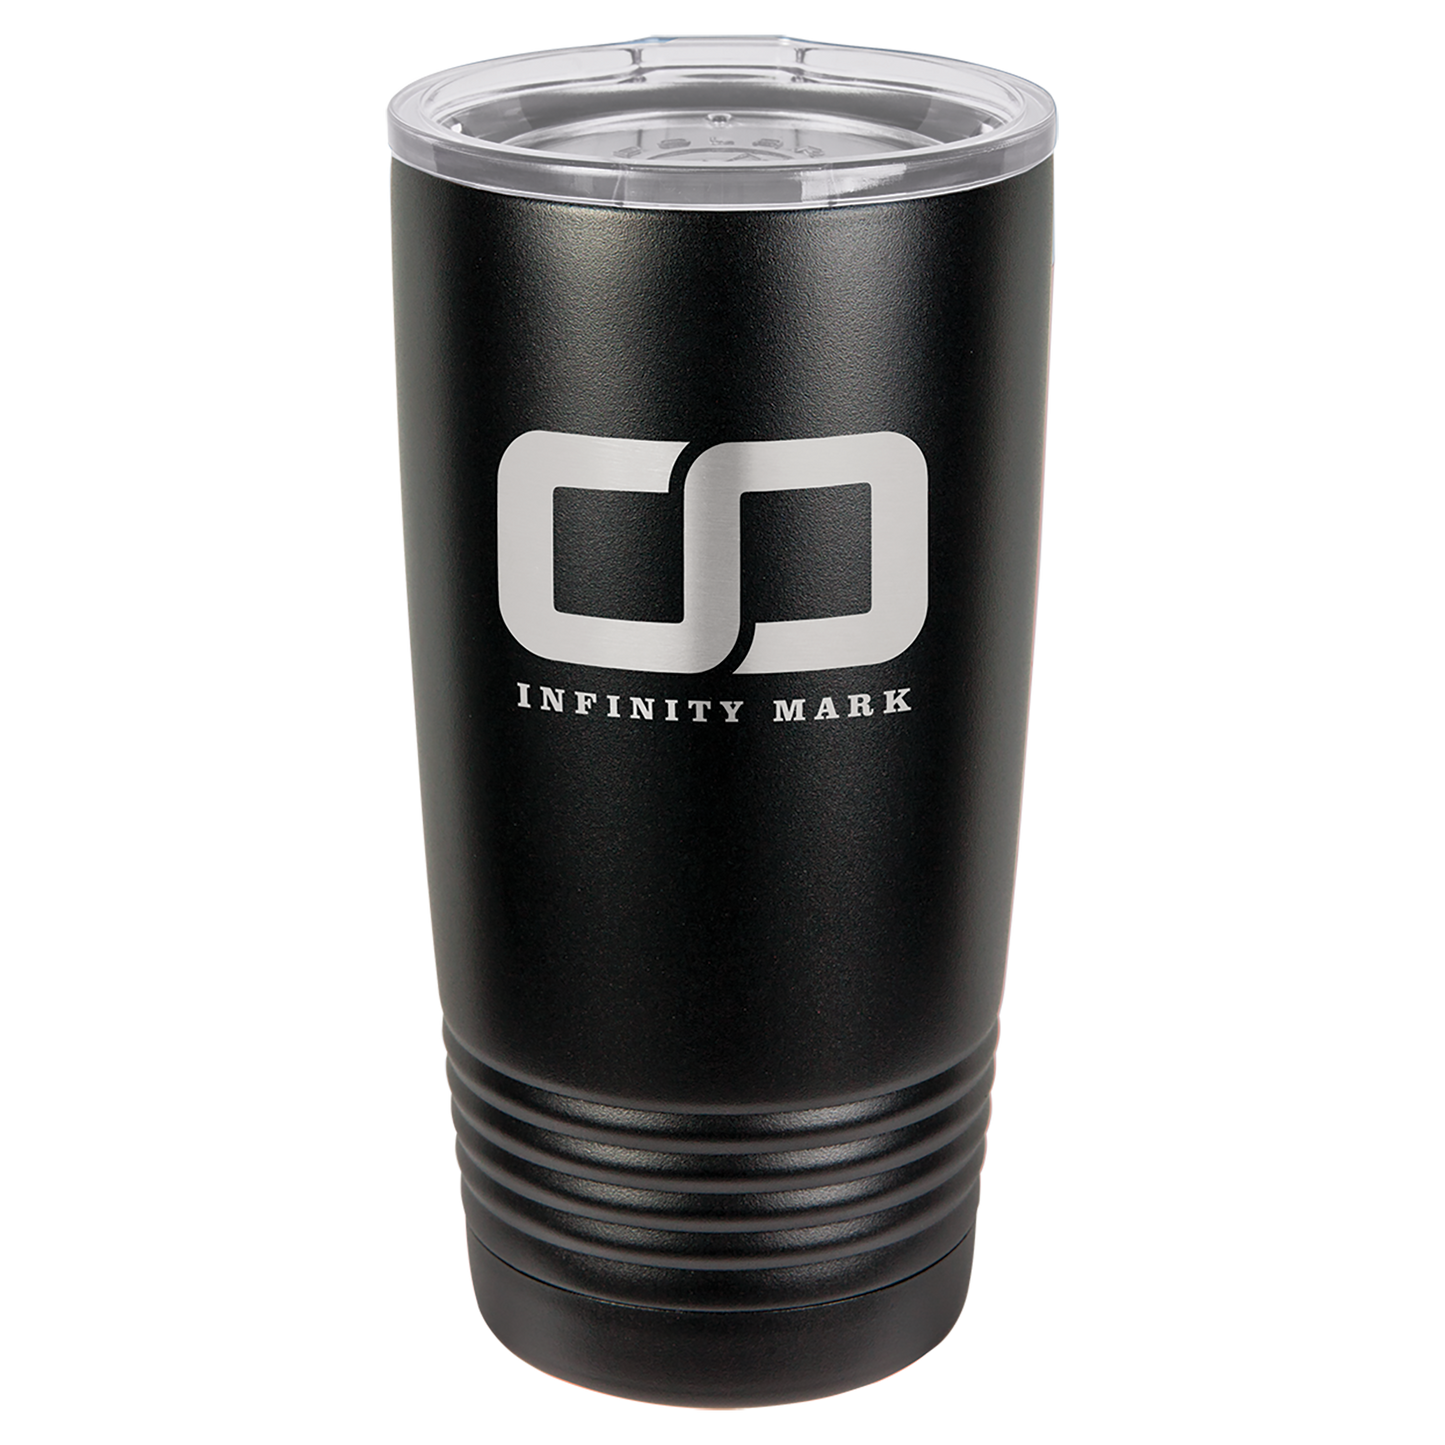 20 oz Stainless Steel Tumblers